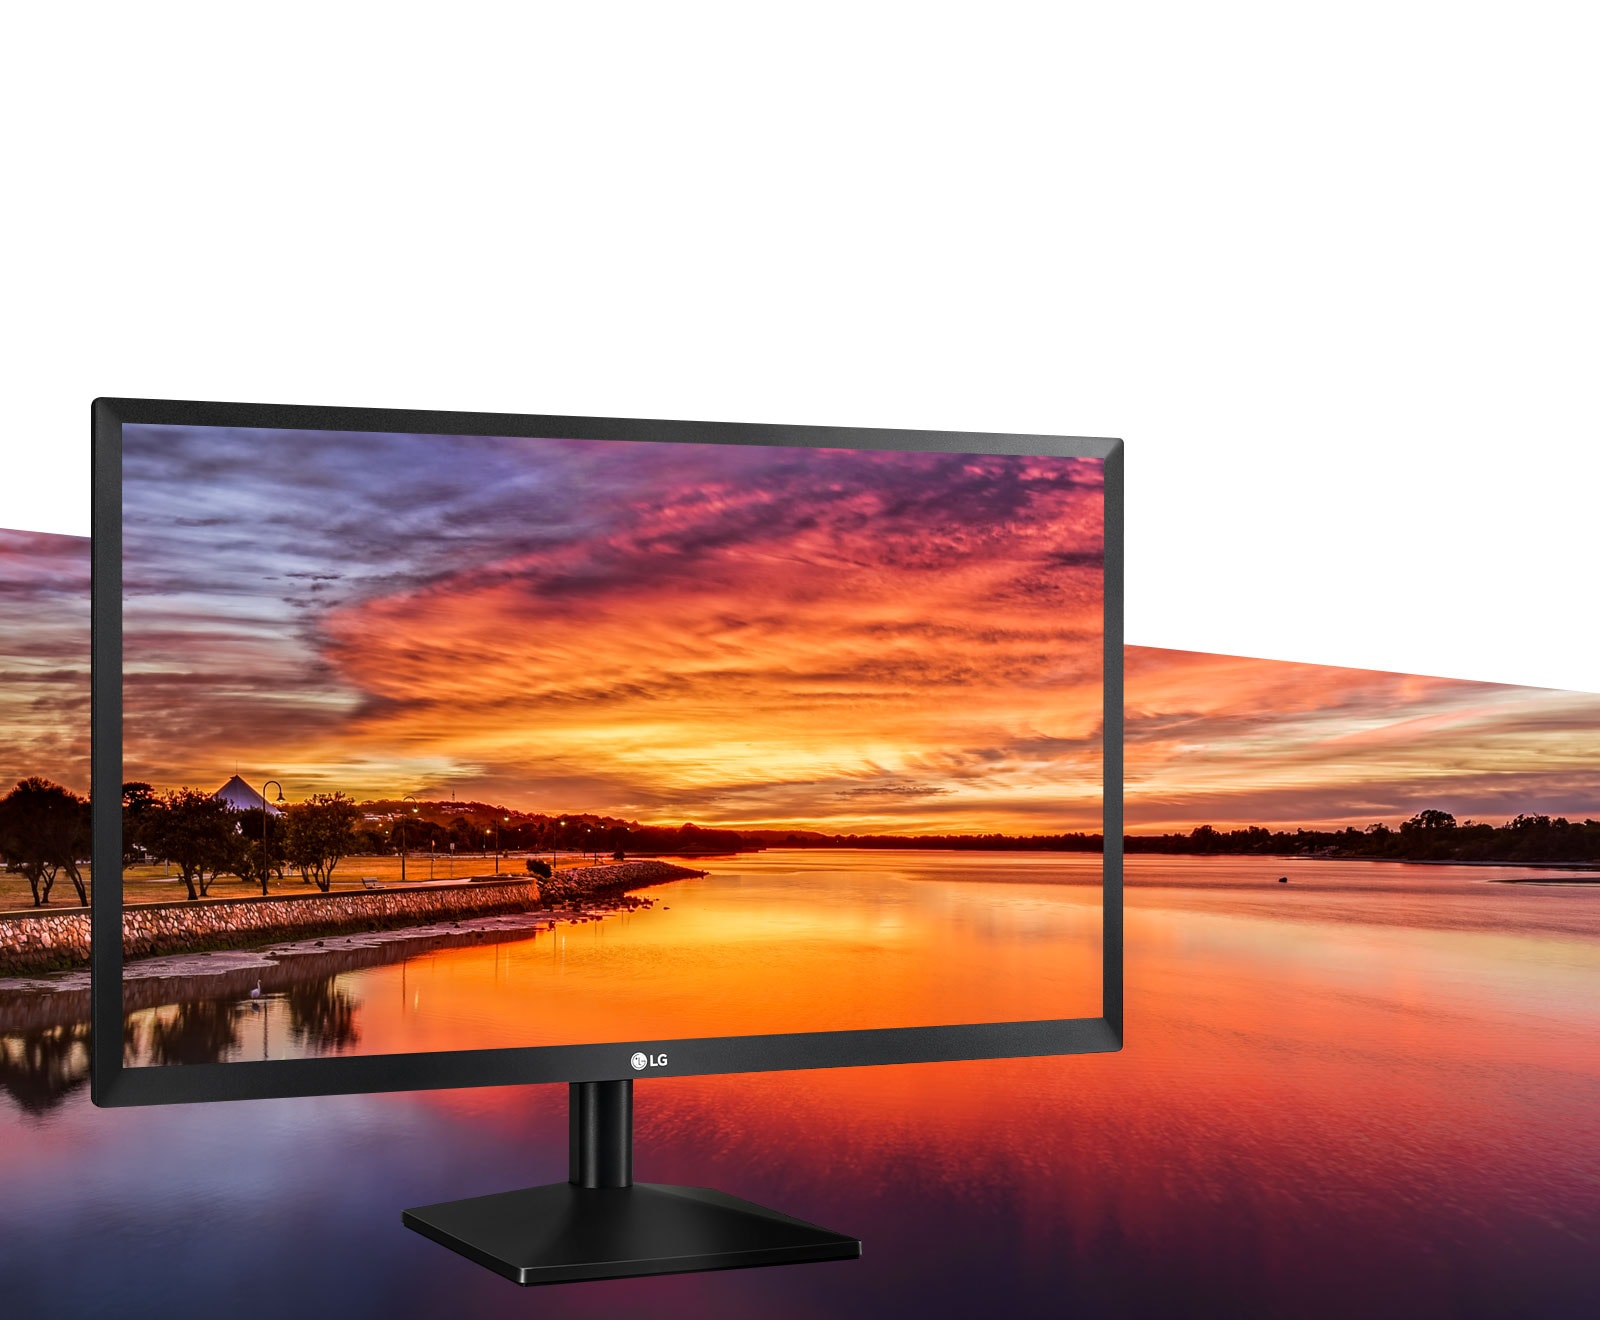 Image of a 22MN430M-B monitor on a background of a sunset and a river